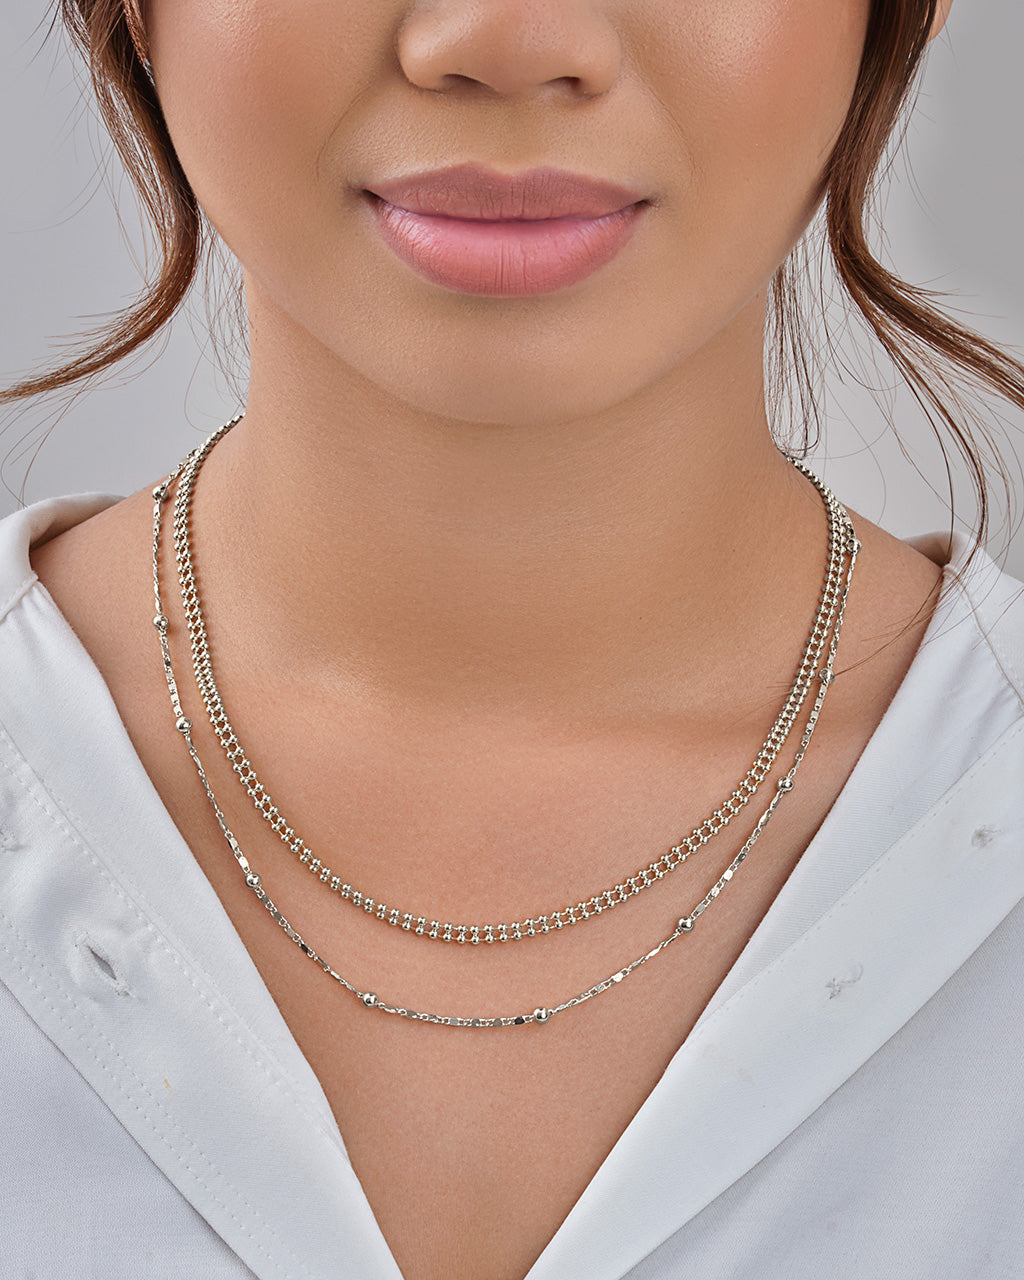 Layered Beaded Chain Necklace Necklace Sterling Forever 